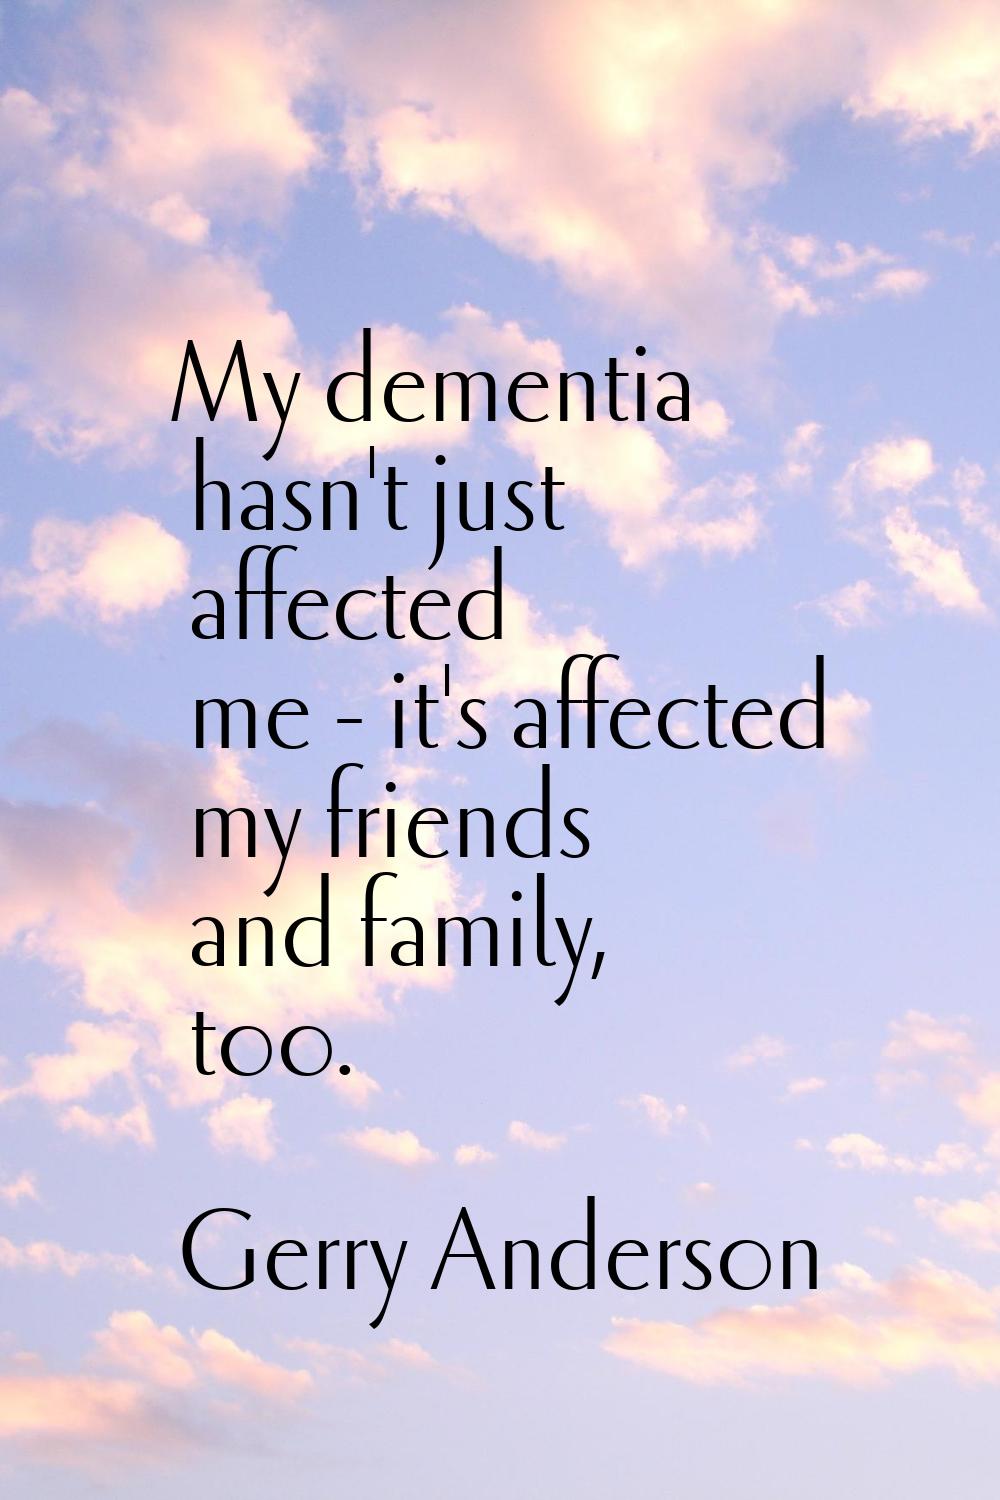 My dementia hasn't just affected me - it's affected my friends and family, too.